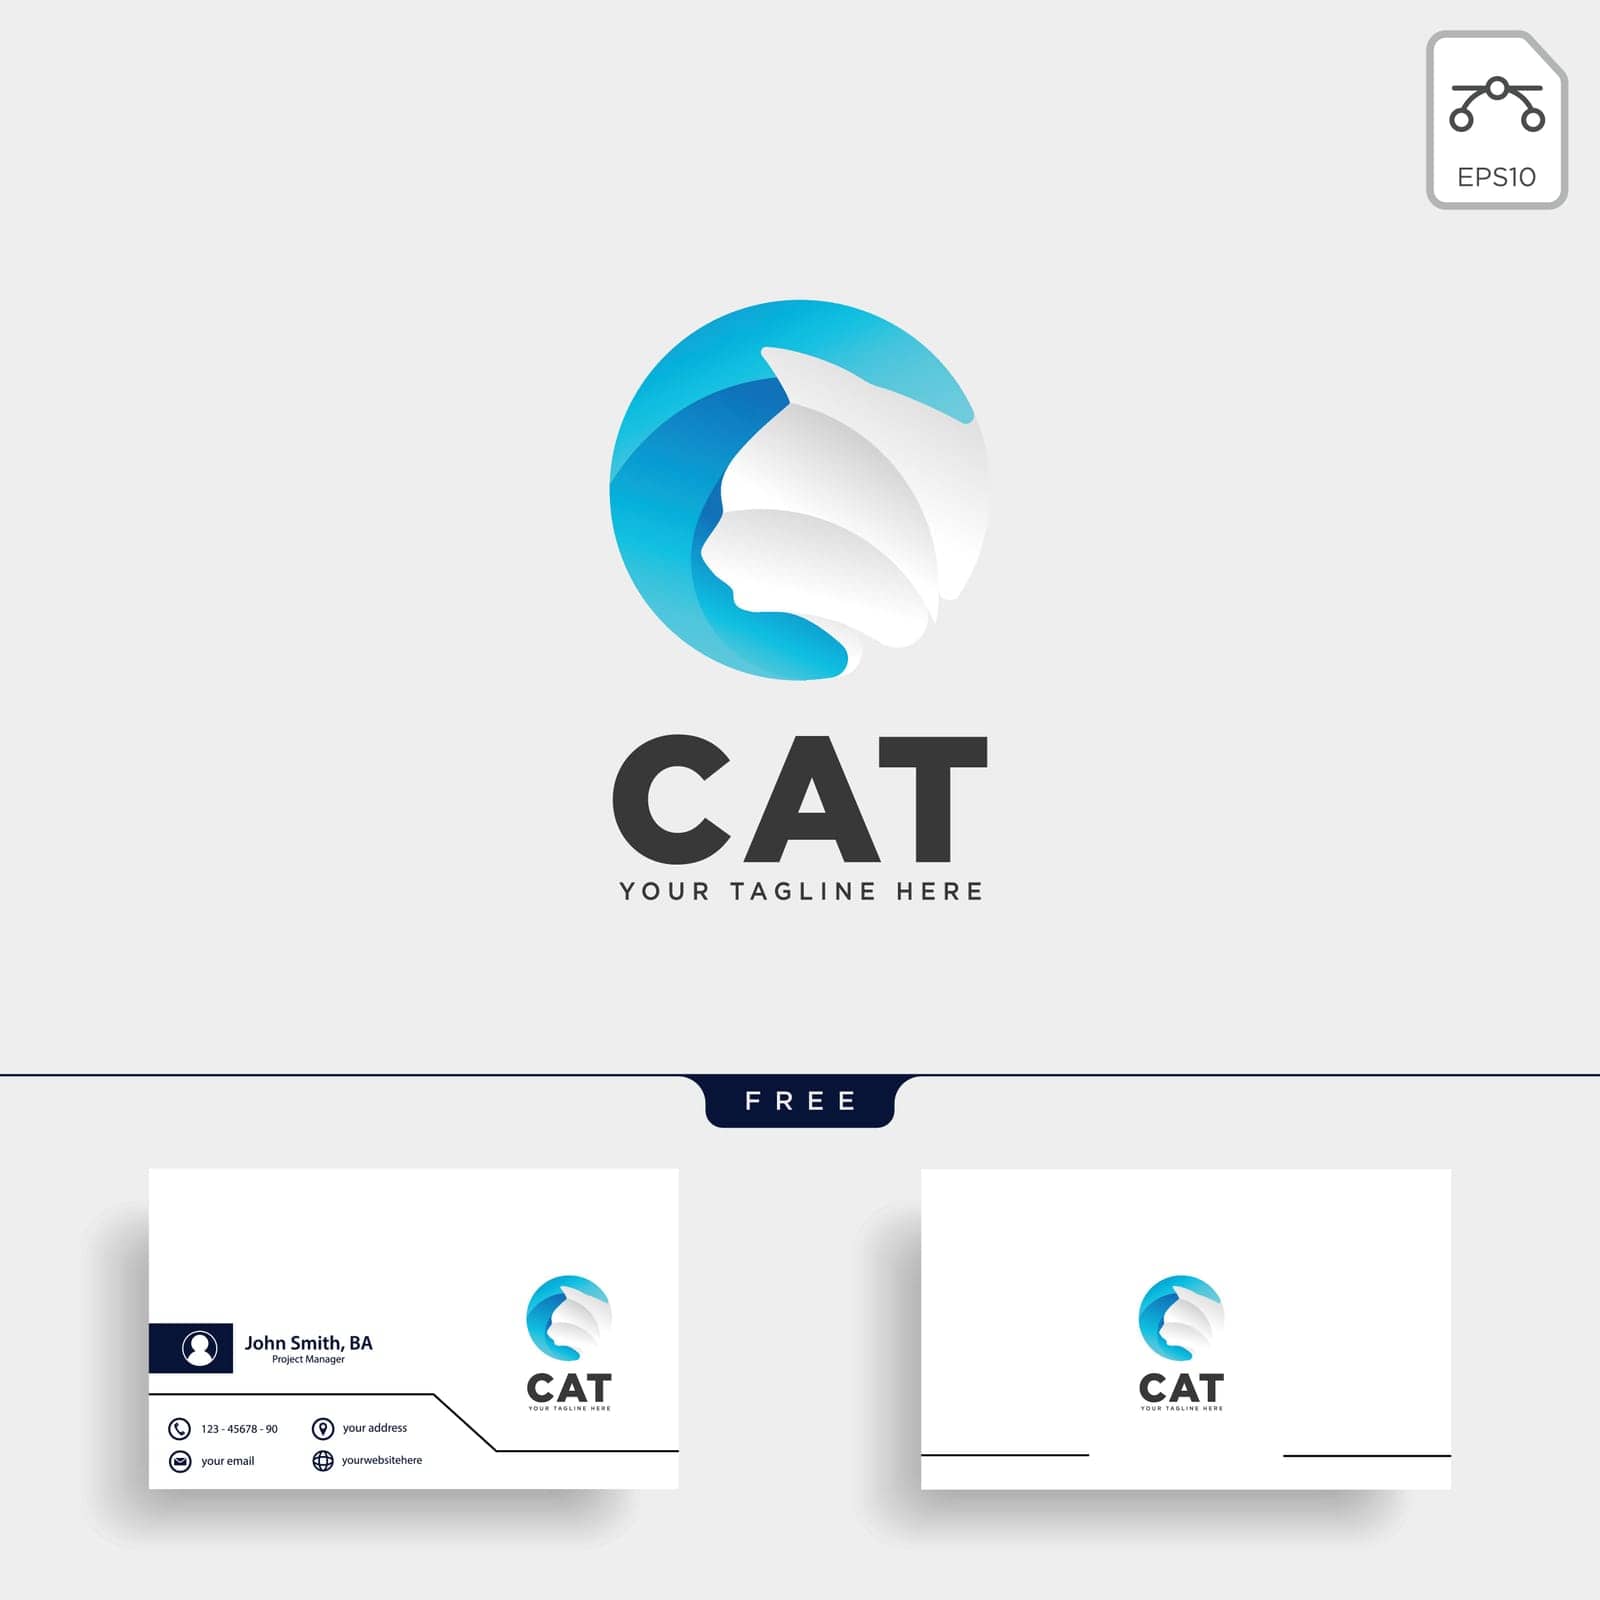 template,pets,pet,food,logo,text,concept,icon,sign,simple,lab,type,cat,clinic,space,care,negative,kitten,heart,love,animal,design,vector,health,element,vet,c,business,hearth,adopt,veterinary,club,creative,letter,typo,hospital,illustration,dog,house,home,friends